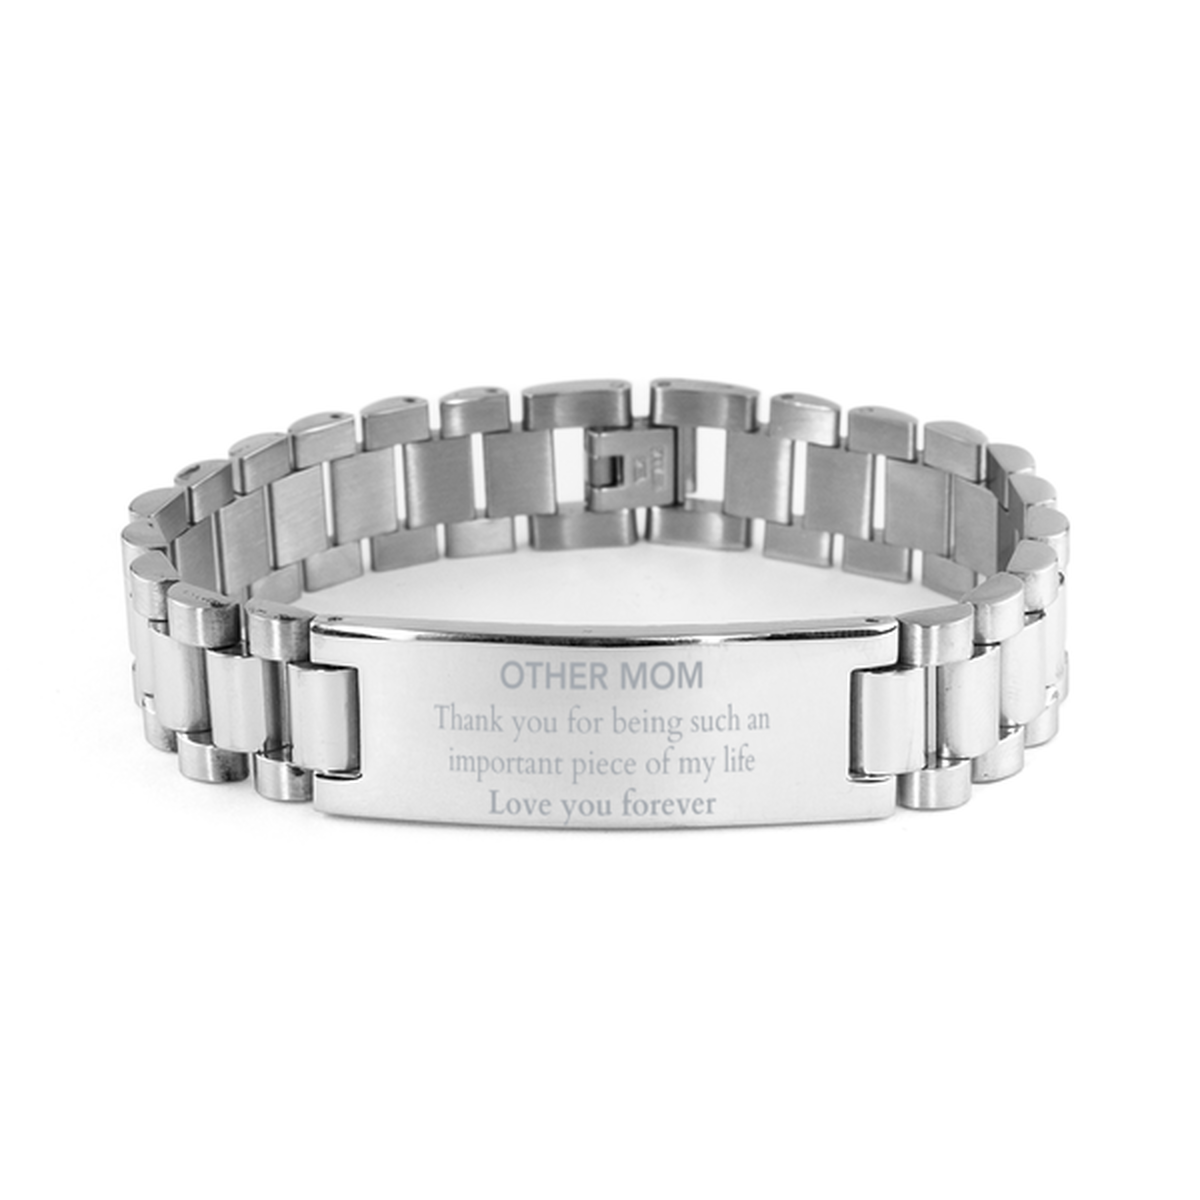 Appropriate Other Mom Ladder Stainless Steel Bracelet Epic Birthday Gifts for Other Mom Thank you for being such an important piece of my life Other Mom Christmas Mothers Fathers Day